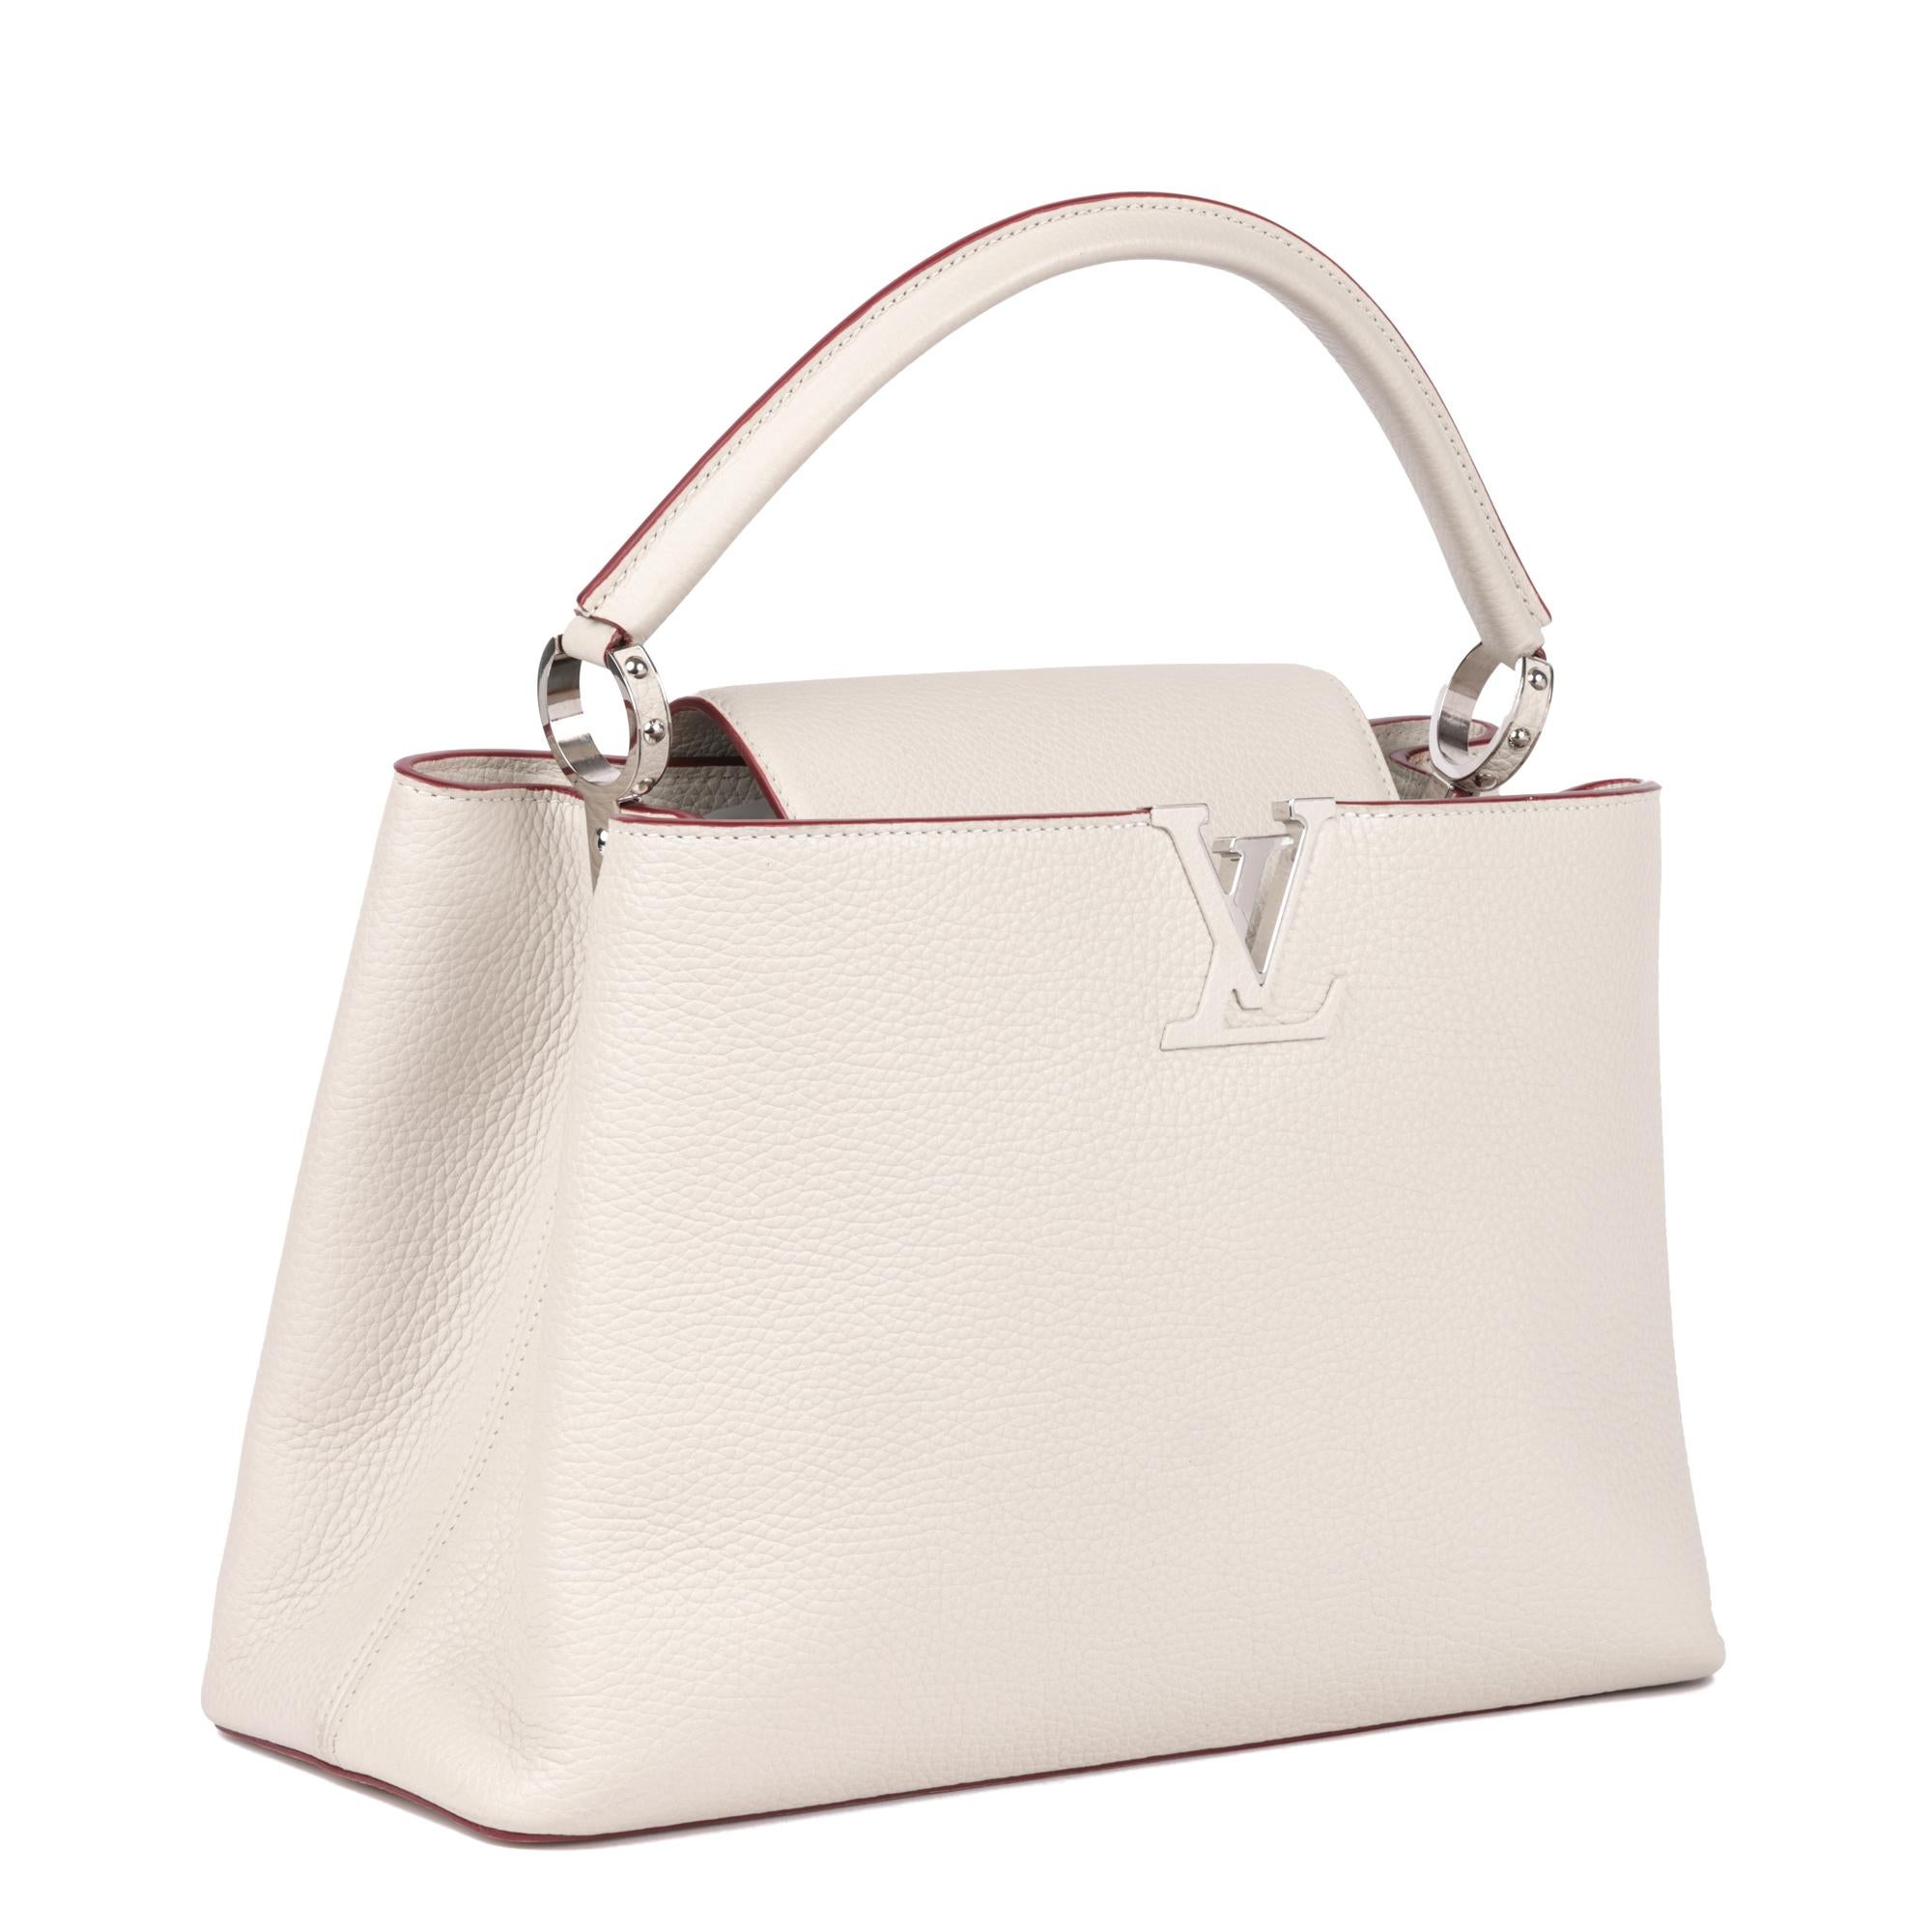 LOUIS VUITTON
White Taurillon Leather Capucines MM

Xupes Reference: CB842
Serial Number: TR2103
Age (Circa): 2013
Accompanied By: Louis Vuitton Dust Bag, Louis Vuitton Repair Card
Authenticity Details: Date Stamp (Made in France)
Gender: